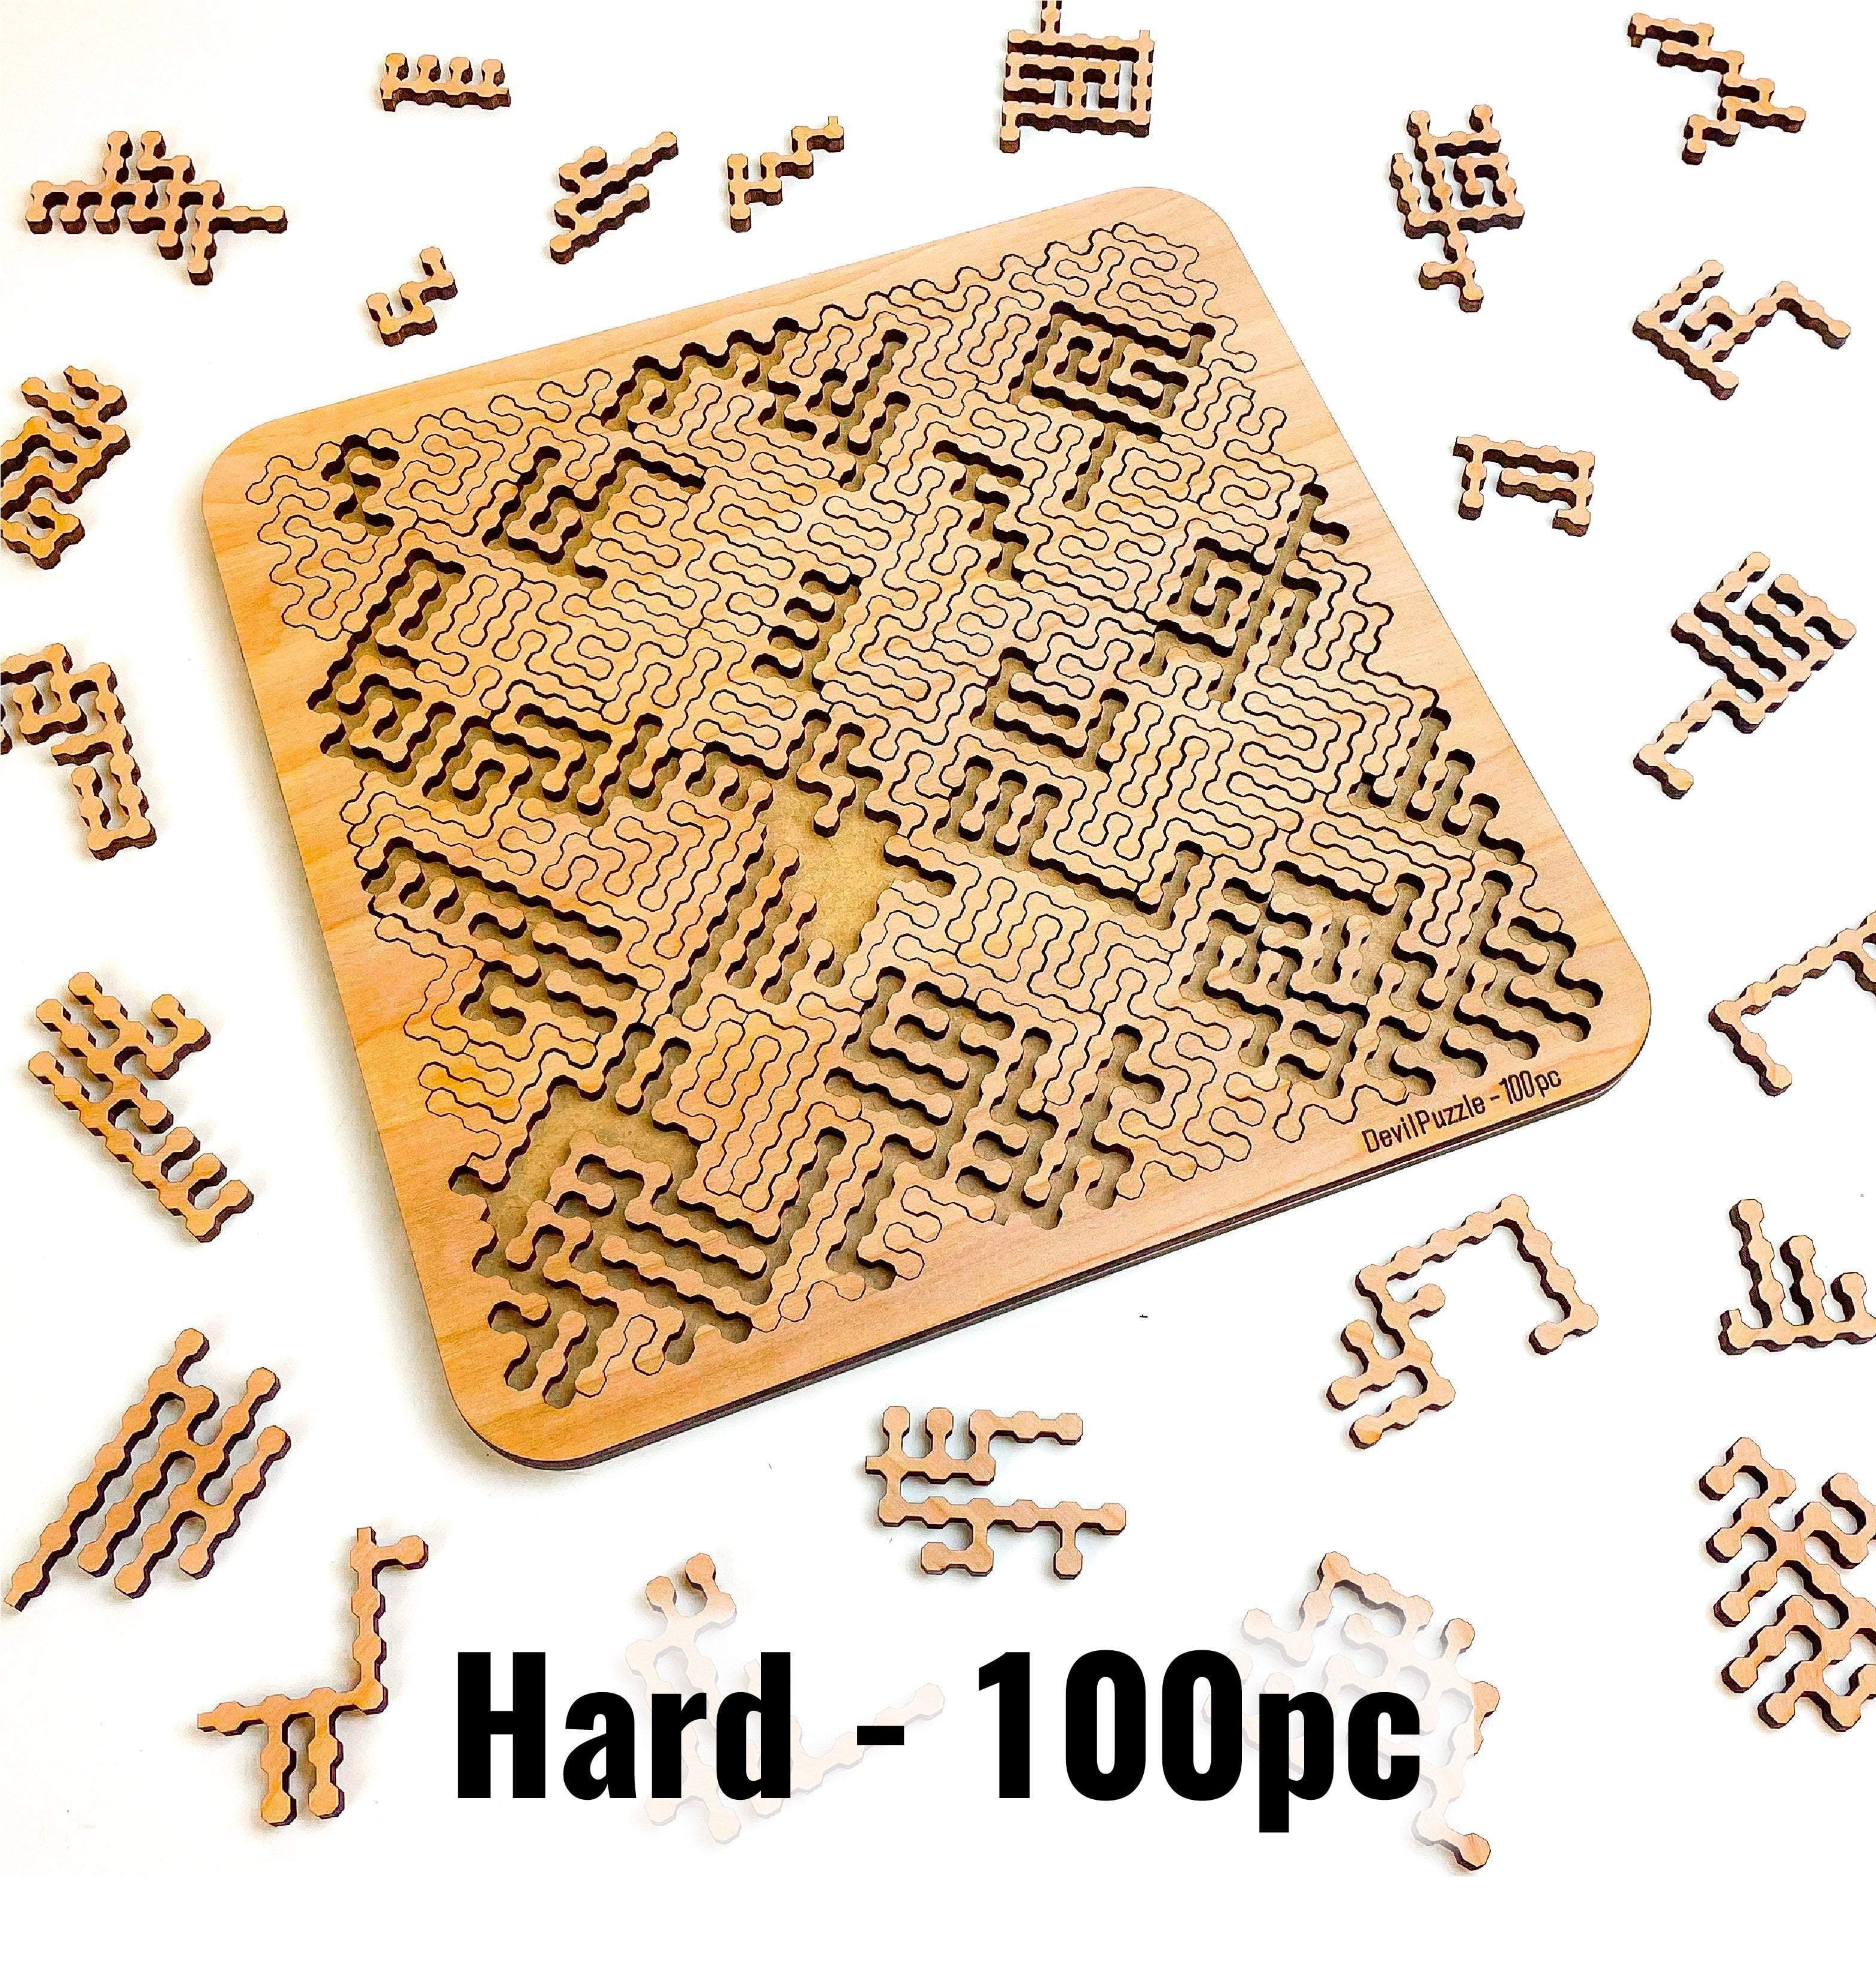 Torched Products Puzzle Hard (100 pieces) Mind Bending Octagonal Fractal Puzzle